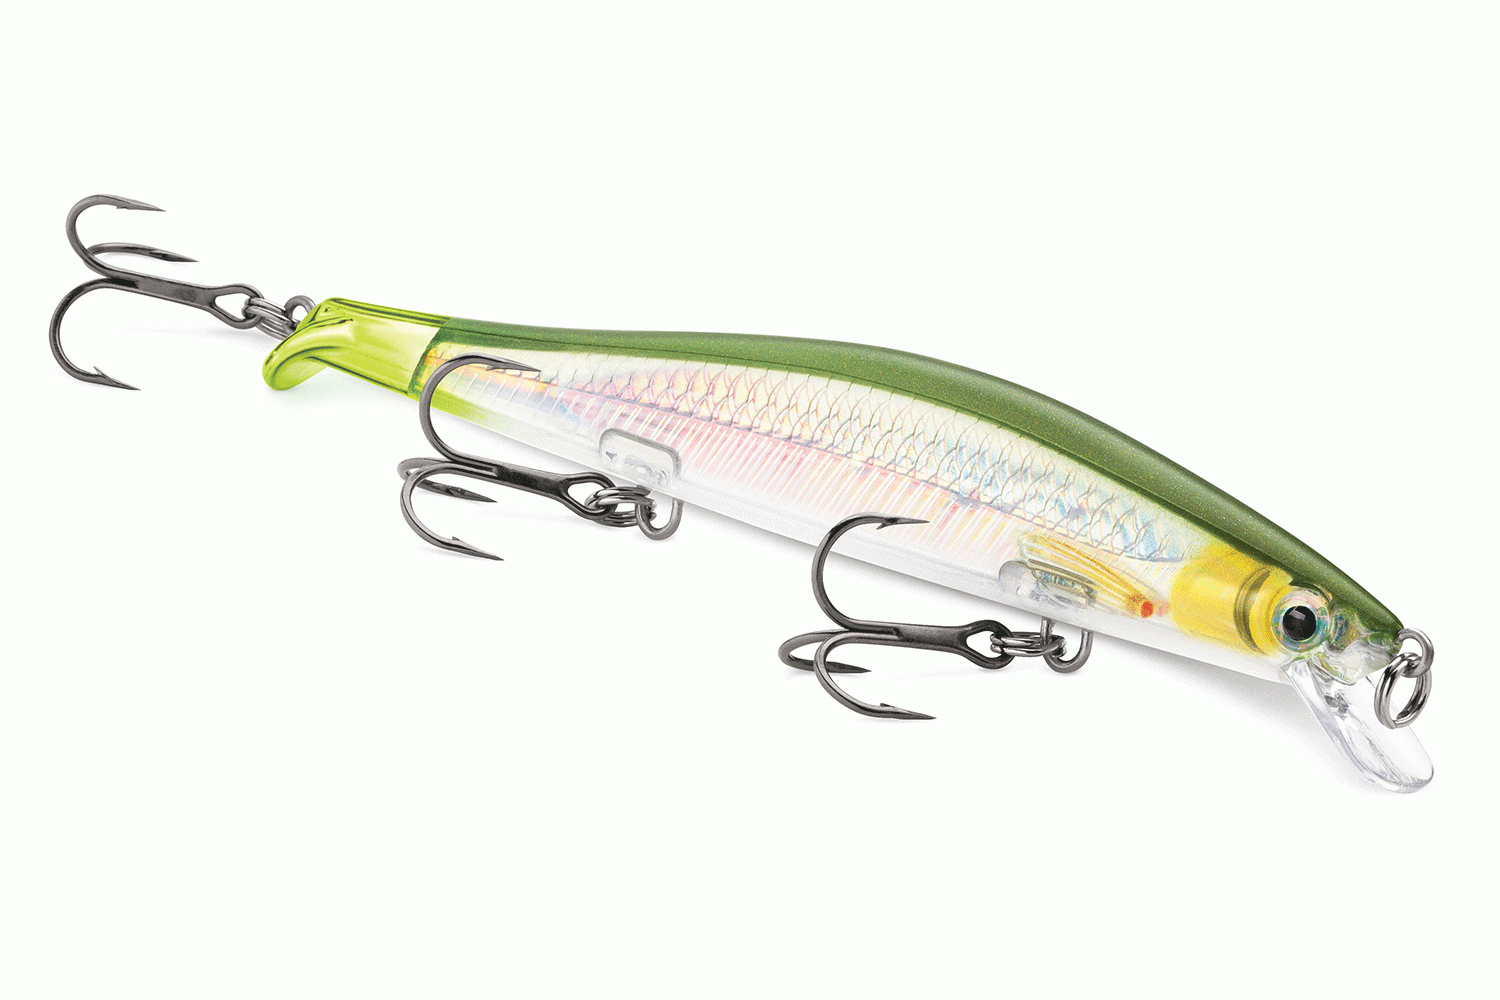 <p><b>Rapala RipStop 12, $10.99</b></p> The RipStop tail design creates a fast ripping, hard stopping, flashing swimbait action. Its forward motion stops on a dime, with a subtle shimmy before coming to rest, then ever so slightly lifts its head with a super slow rise. Fish it like a swimbait or a jerkbait, there is no wrong way. Now in a larger size with three treble hooks, the bass are in trouble!<br> <a href=